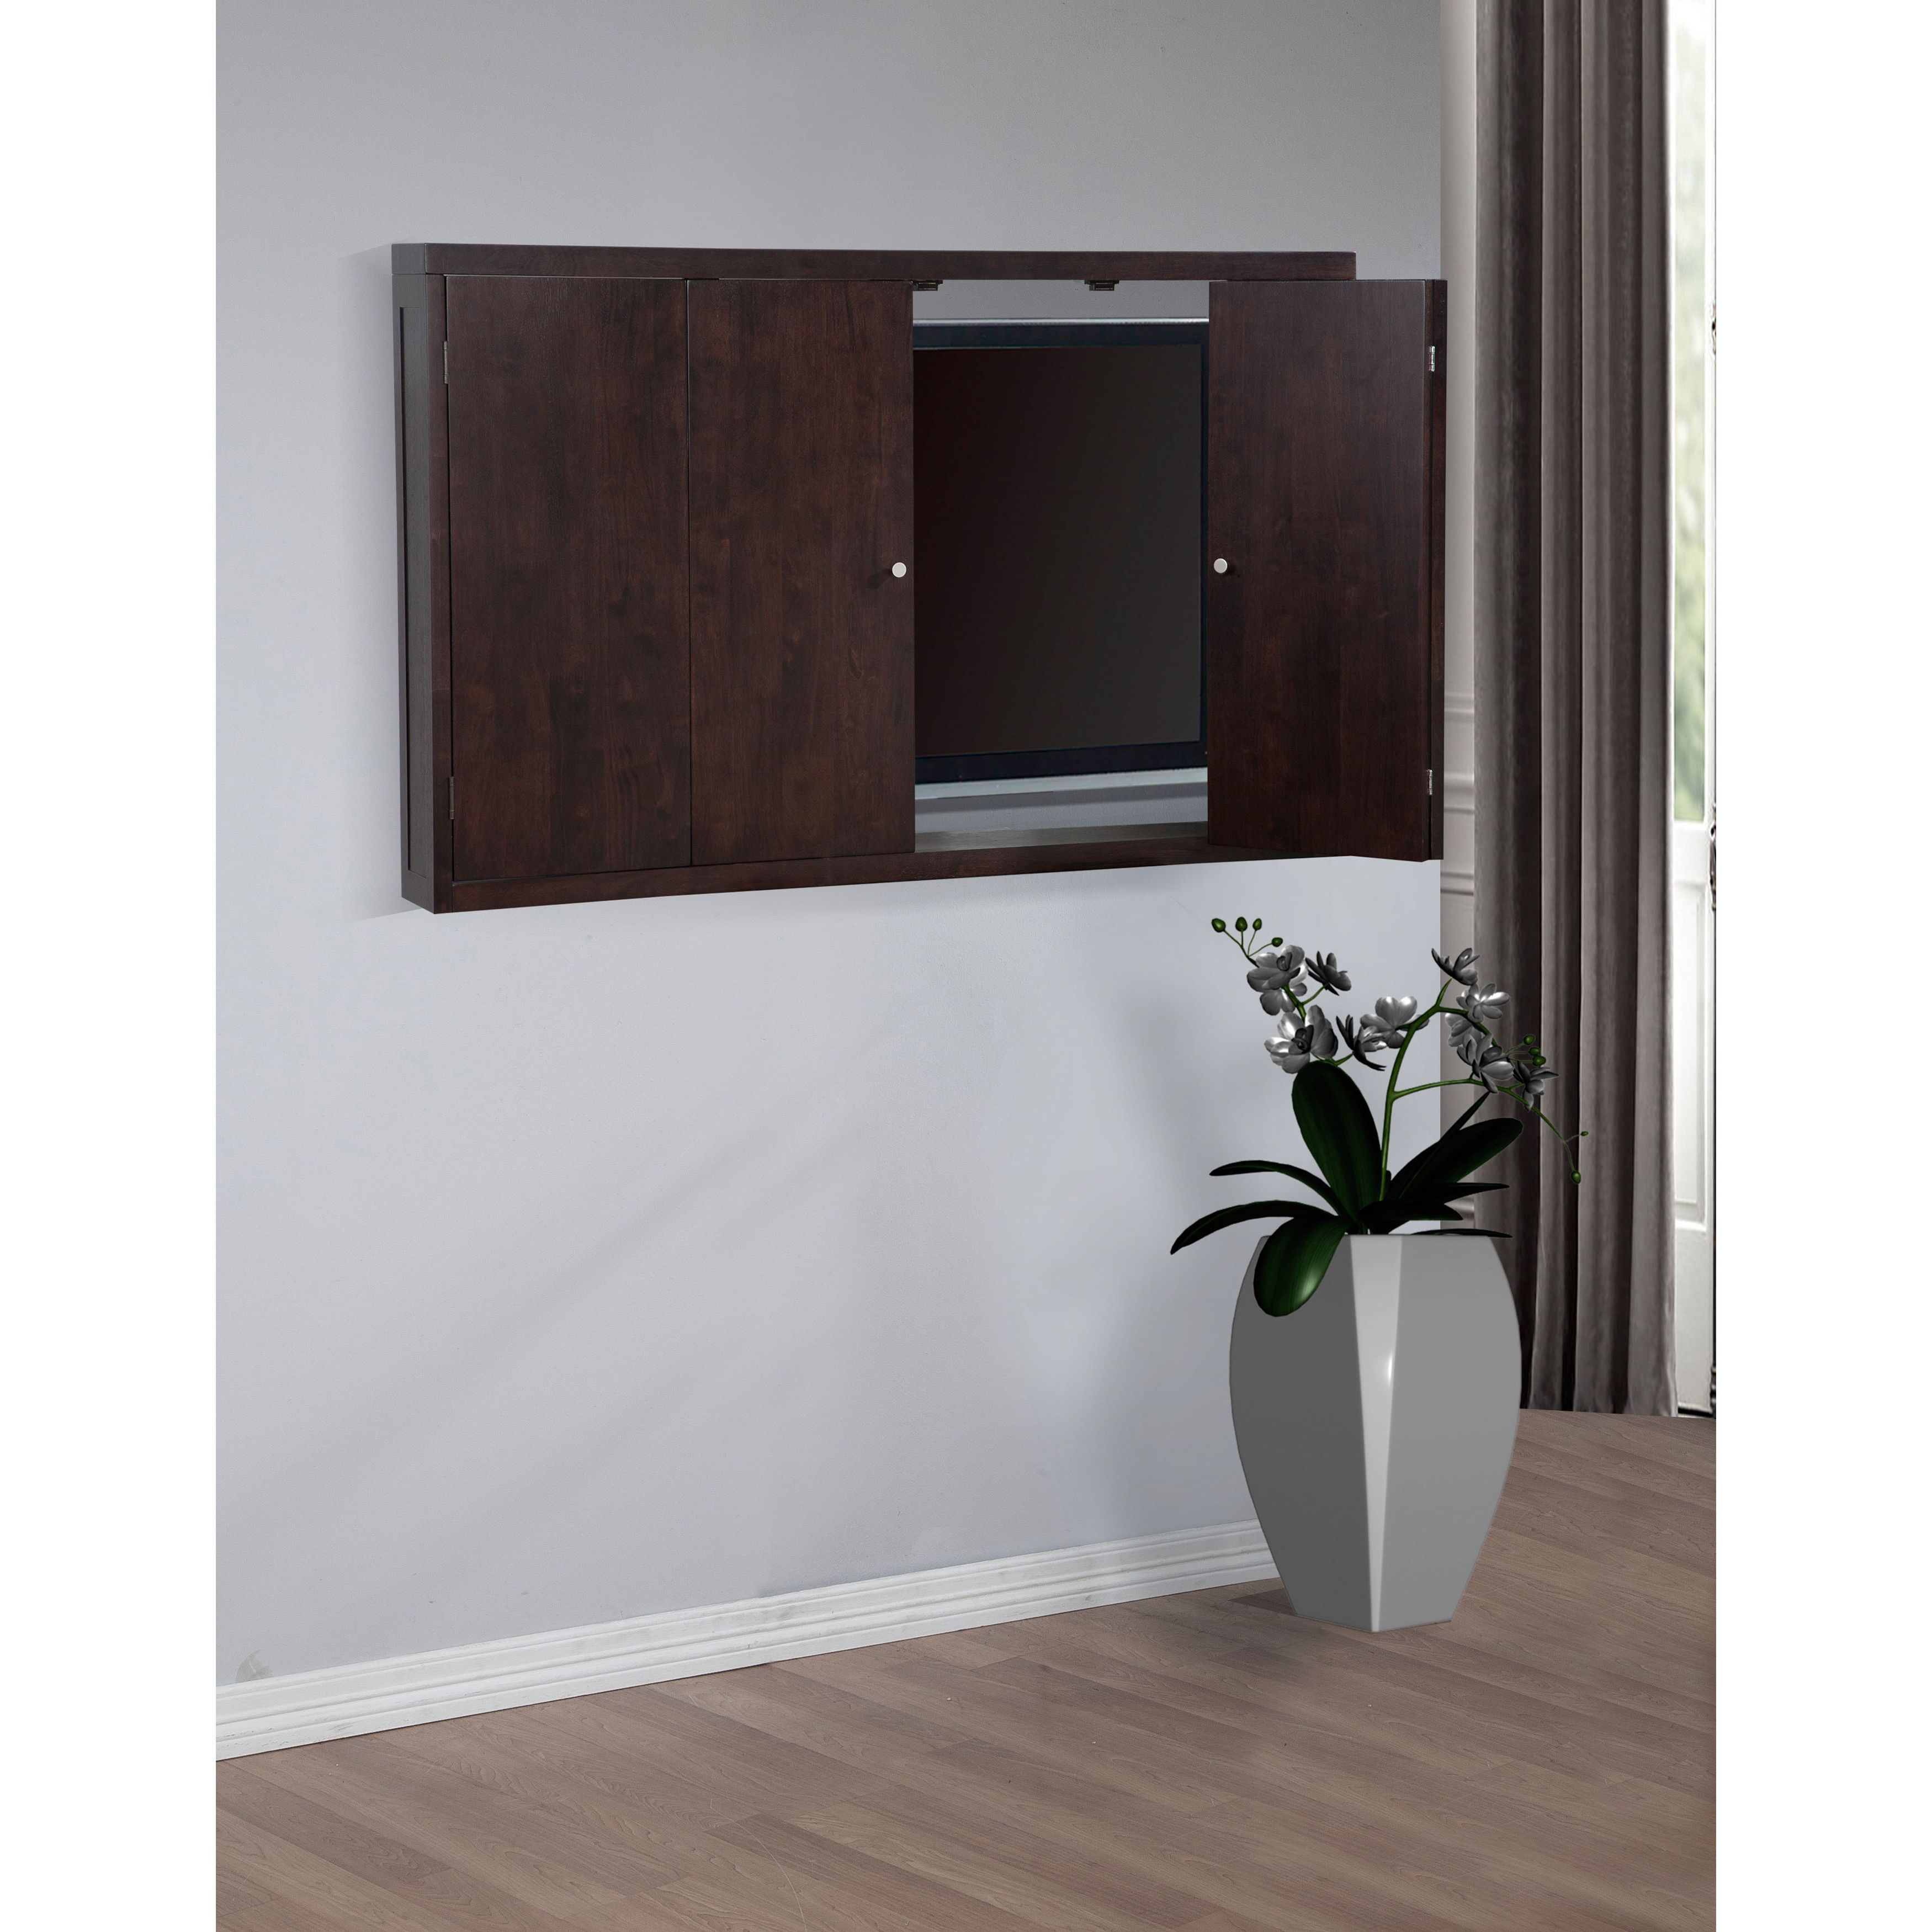 Most Recent Wall Mounted Tv Cabinets For Flat Screens With Doors Within This Sharp Looking, Tv Wall Mount Cabinet Is A Great Way To Store (View 6 of 20)